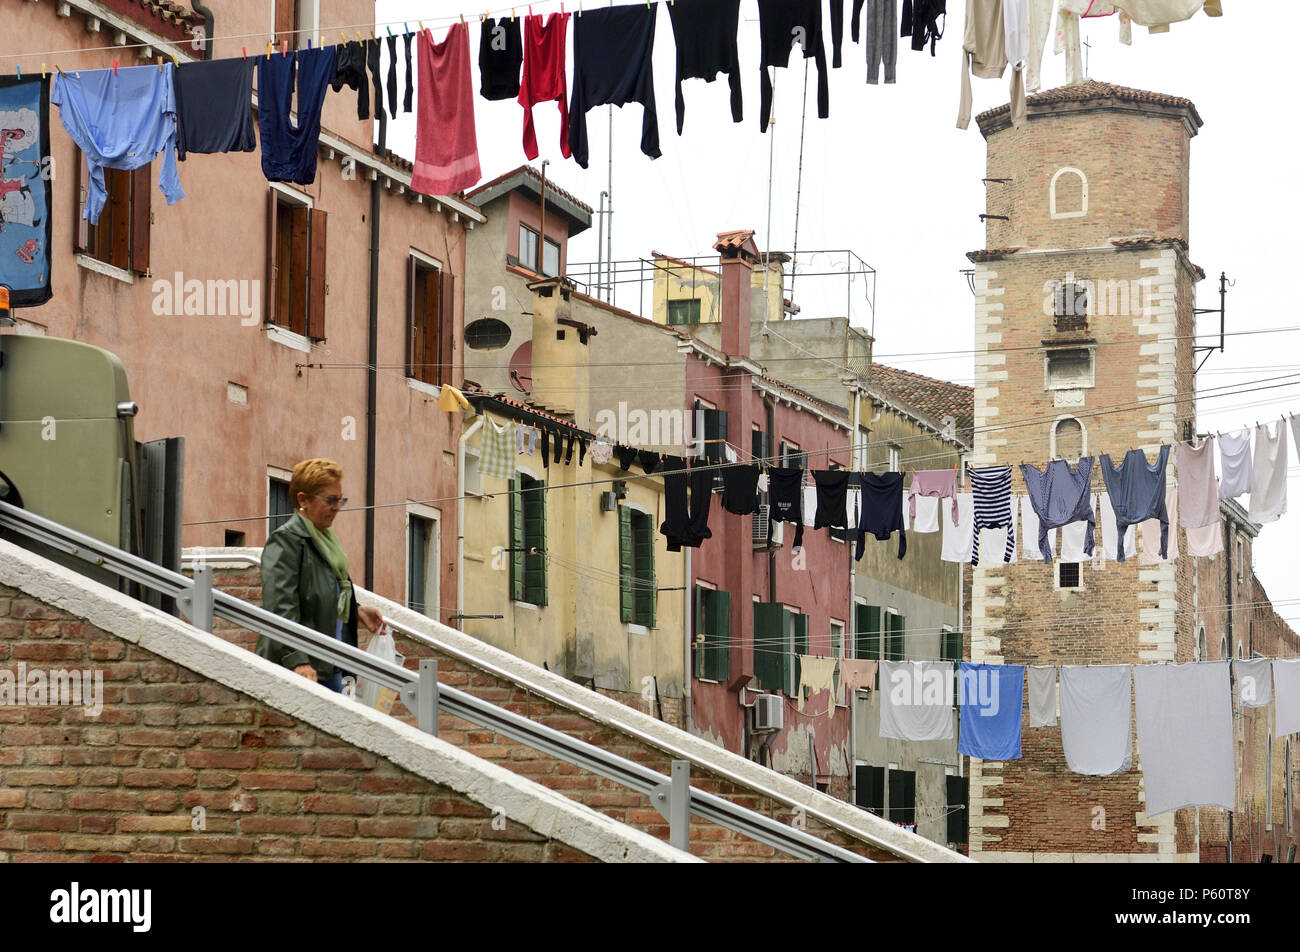 An Italian woman walks past hanging laundry in the off-beat residential neighborhoods of the Commune di Venezia and Centro Storico in Venice, Italy. Stock Photo